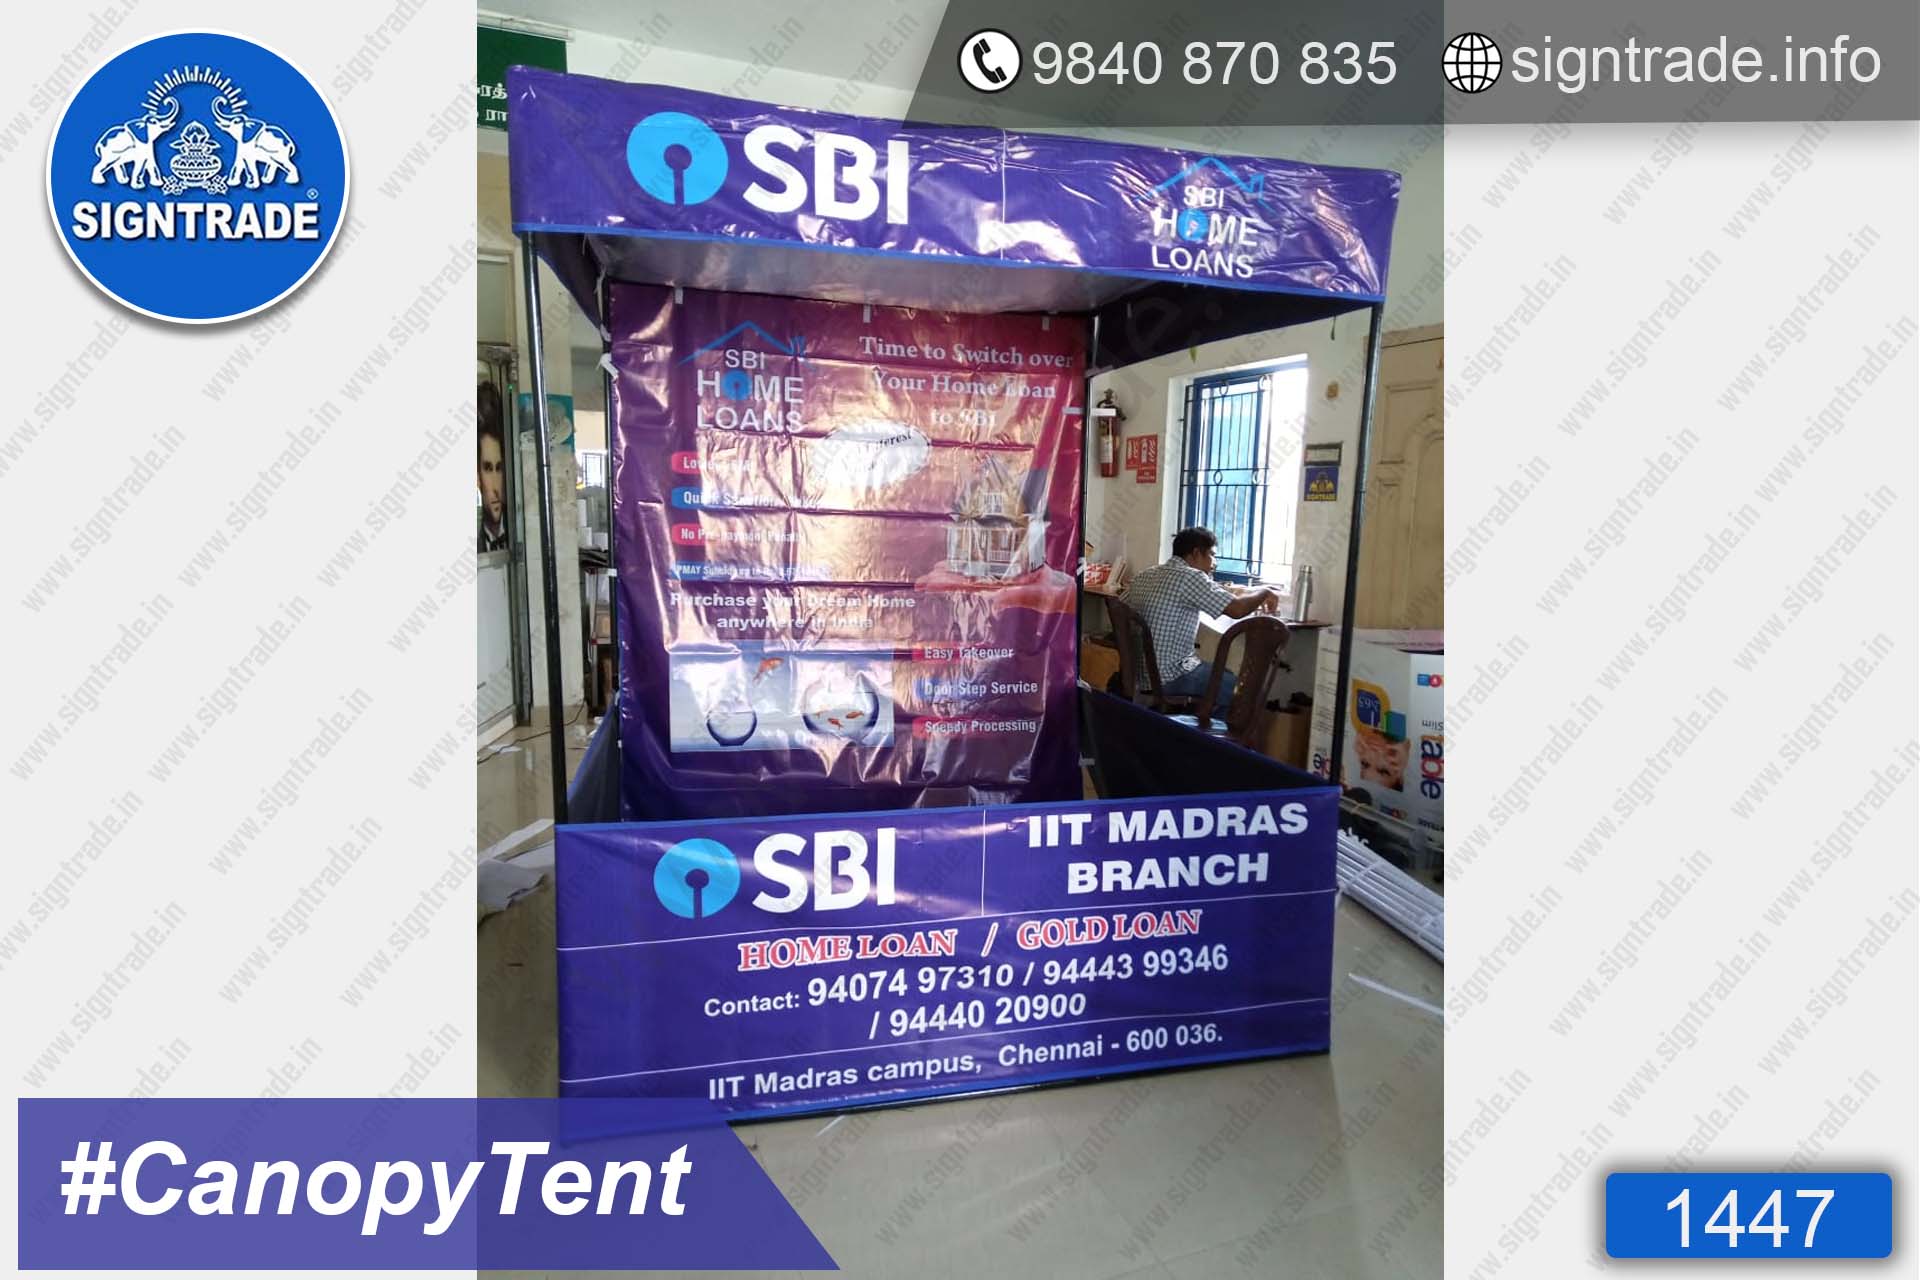 SBI Home Loan - 1447, Canopy tent, Flat roof tent, Promo tent, Promotional tent, Advertising tent, Promo Flag